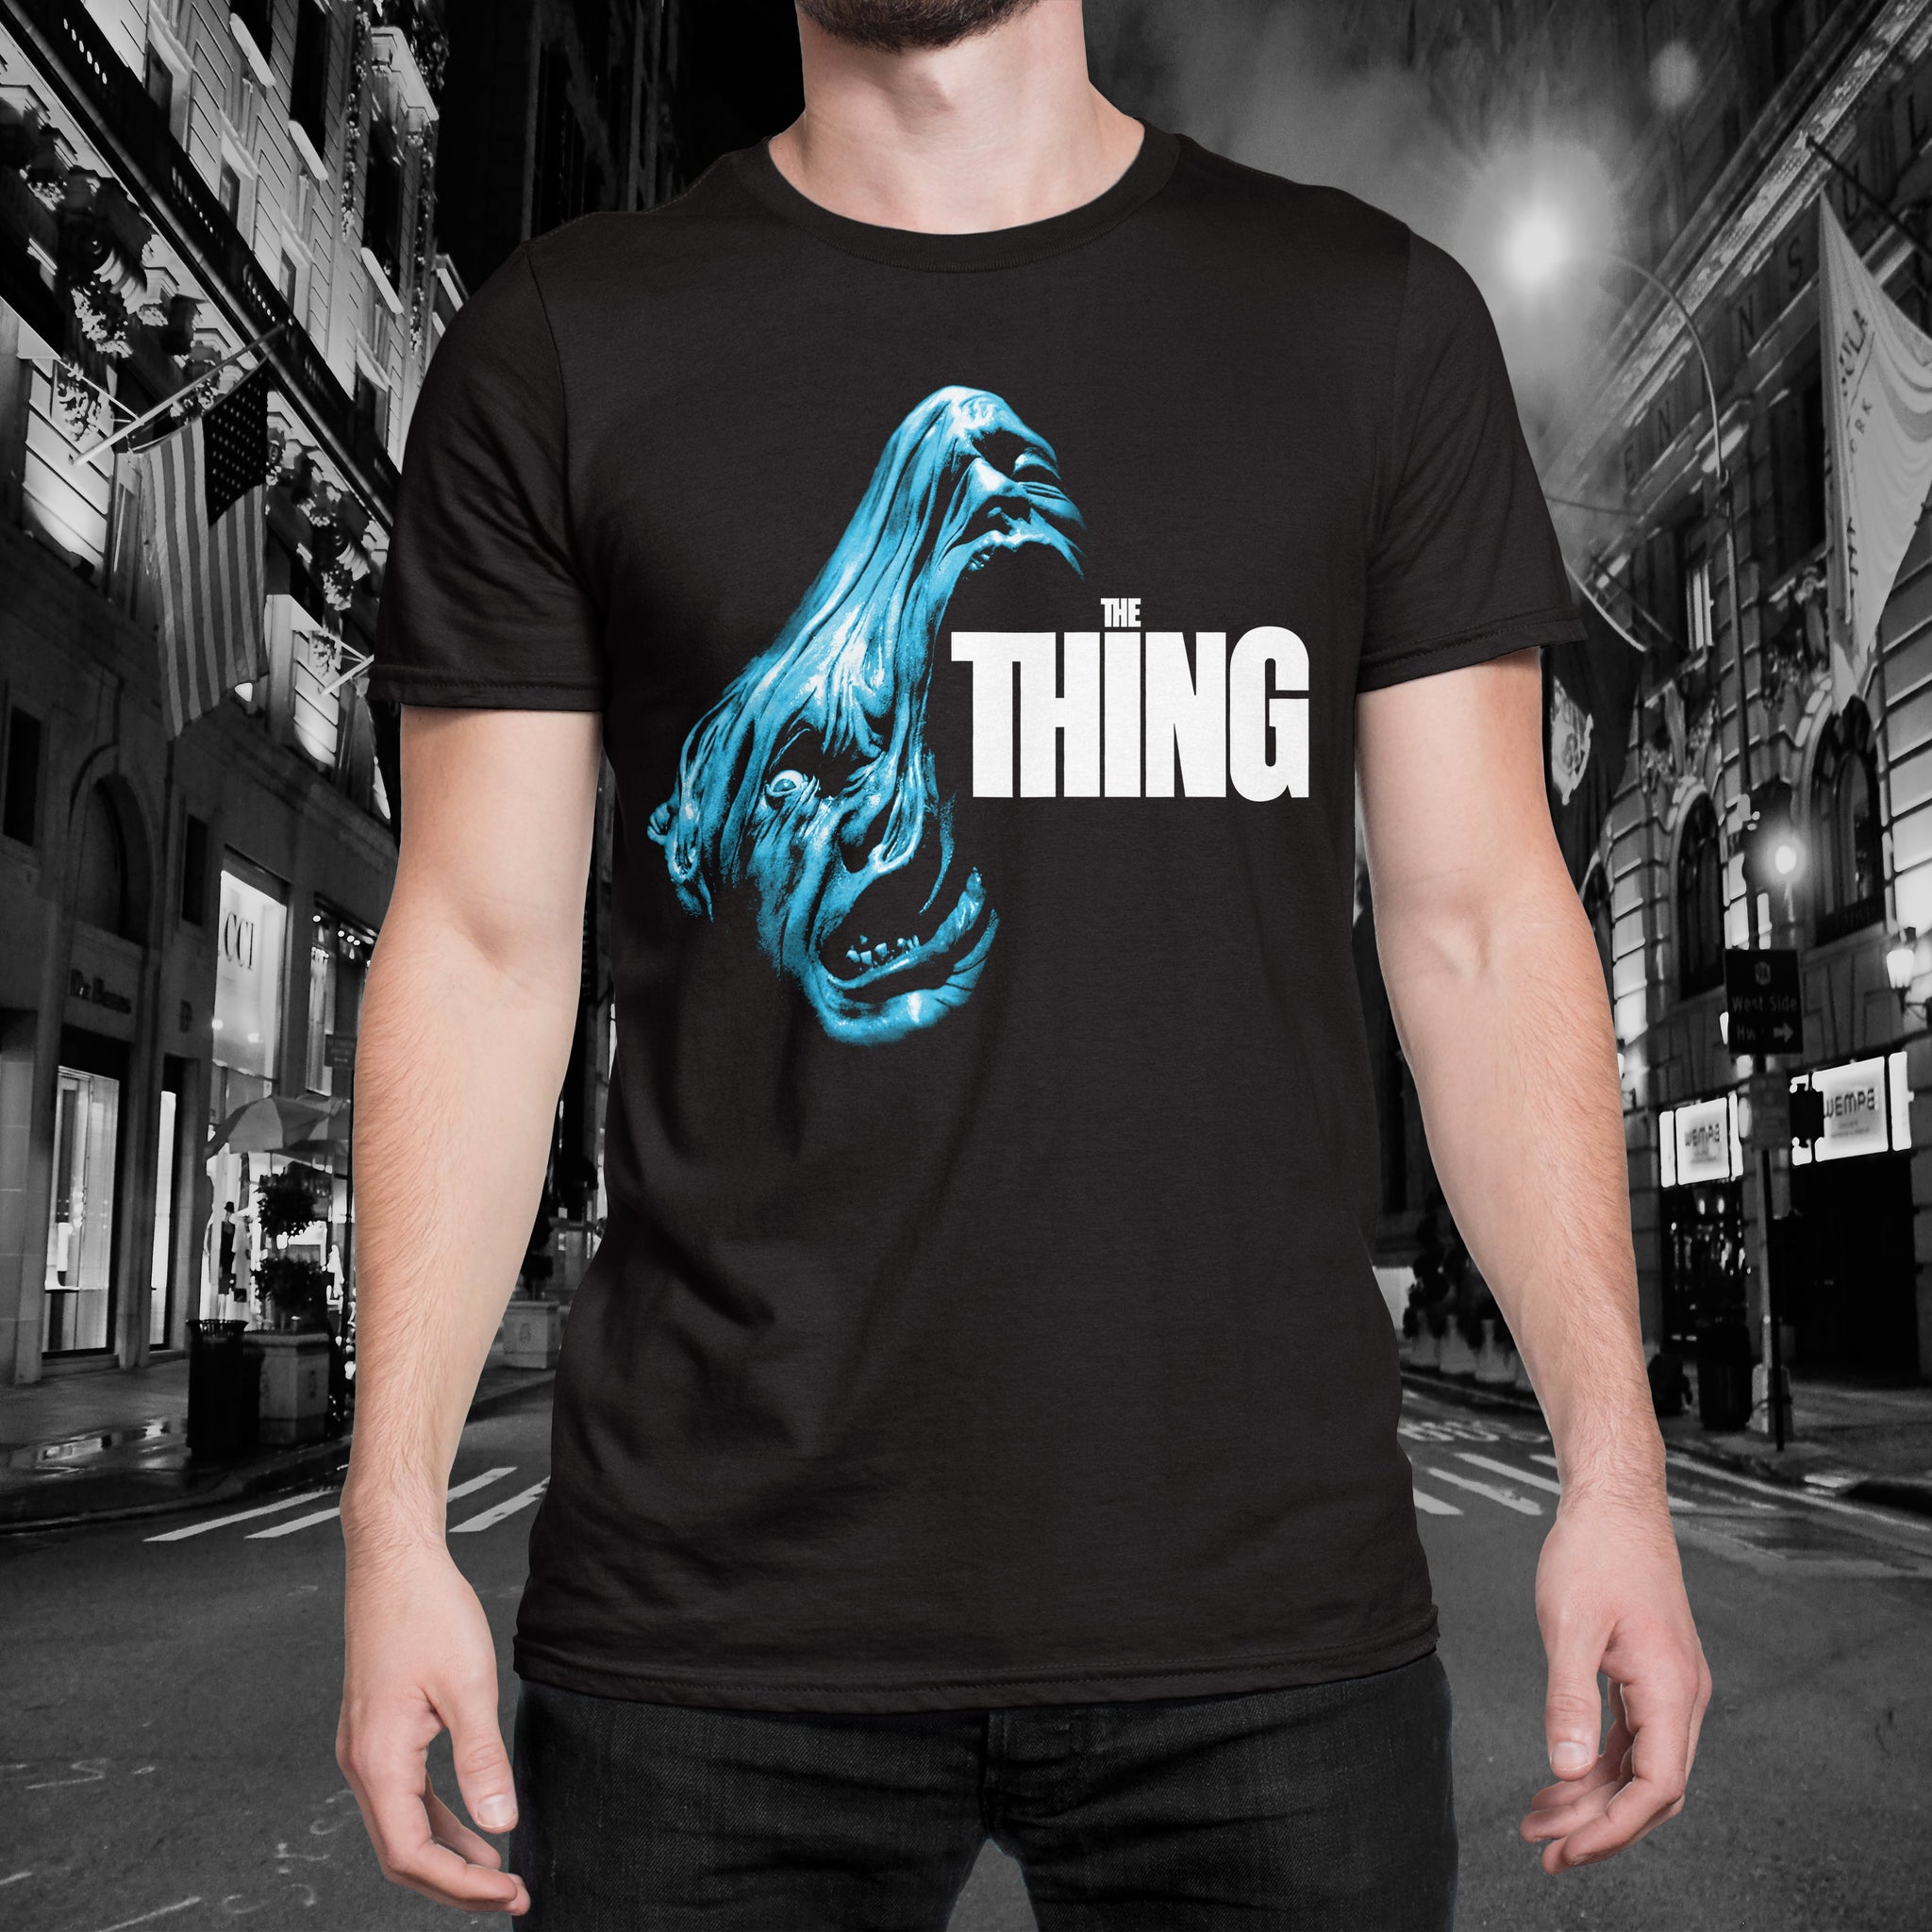 The Thing "Organism" Tee